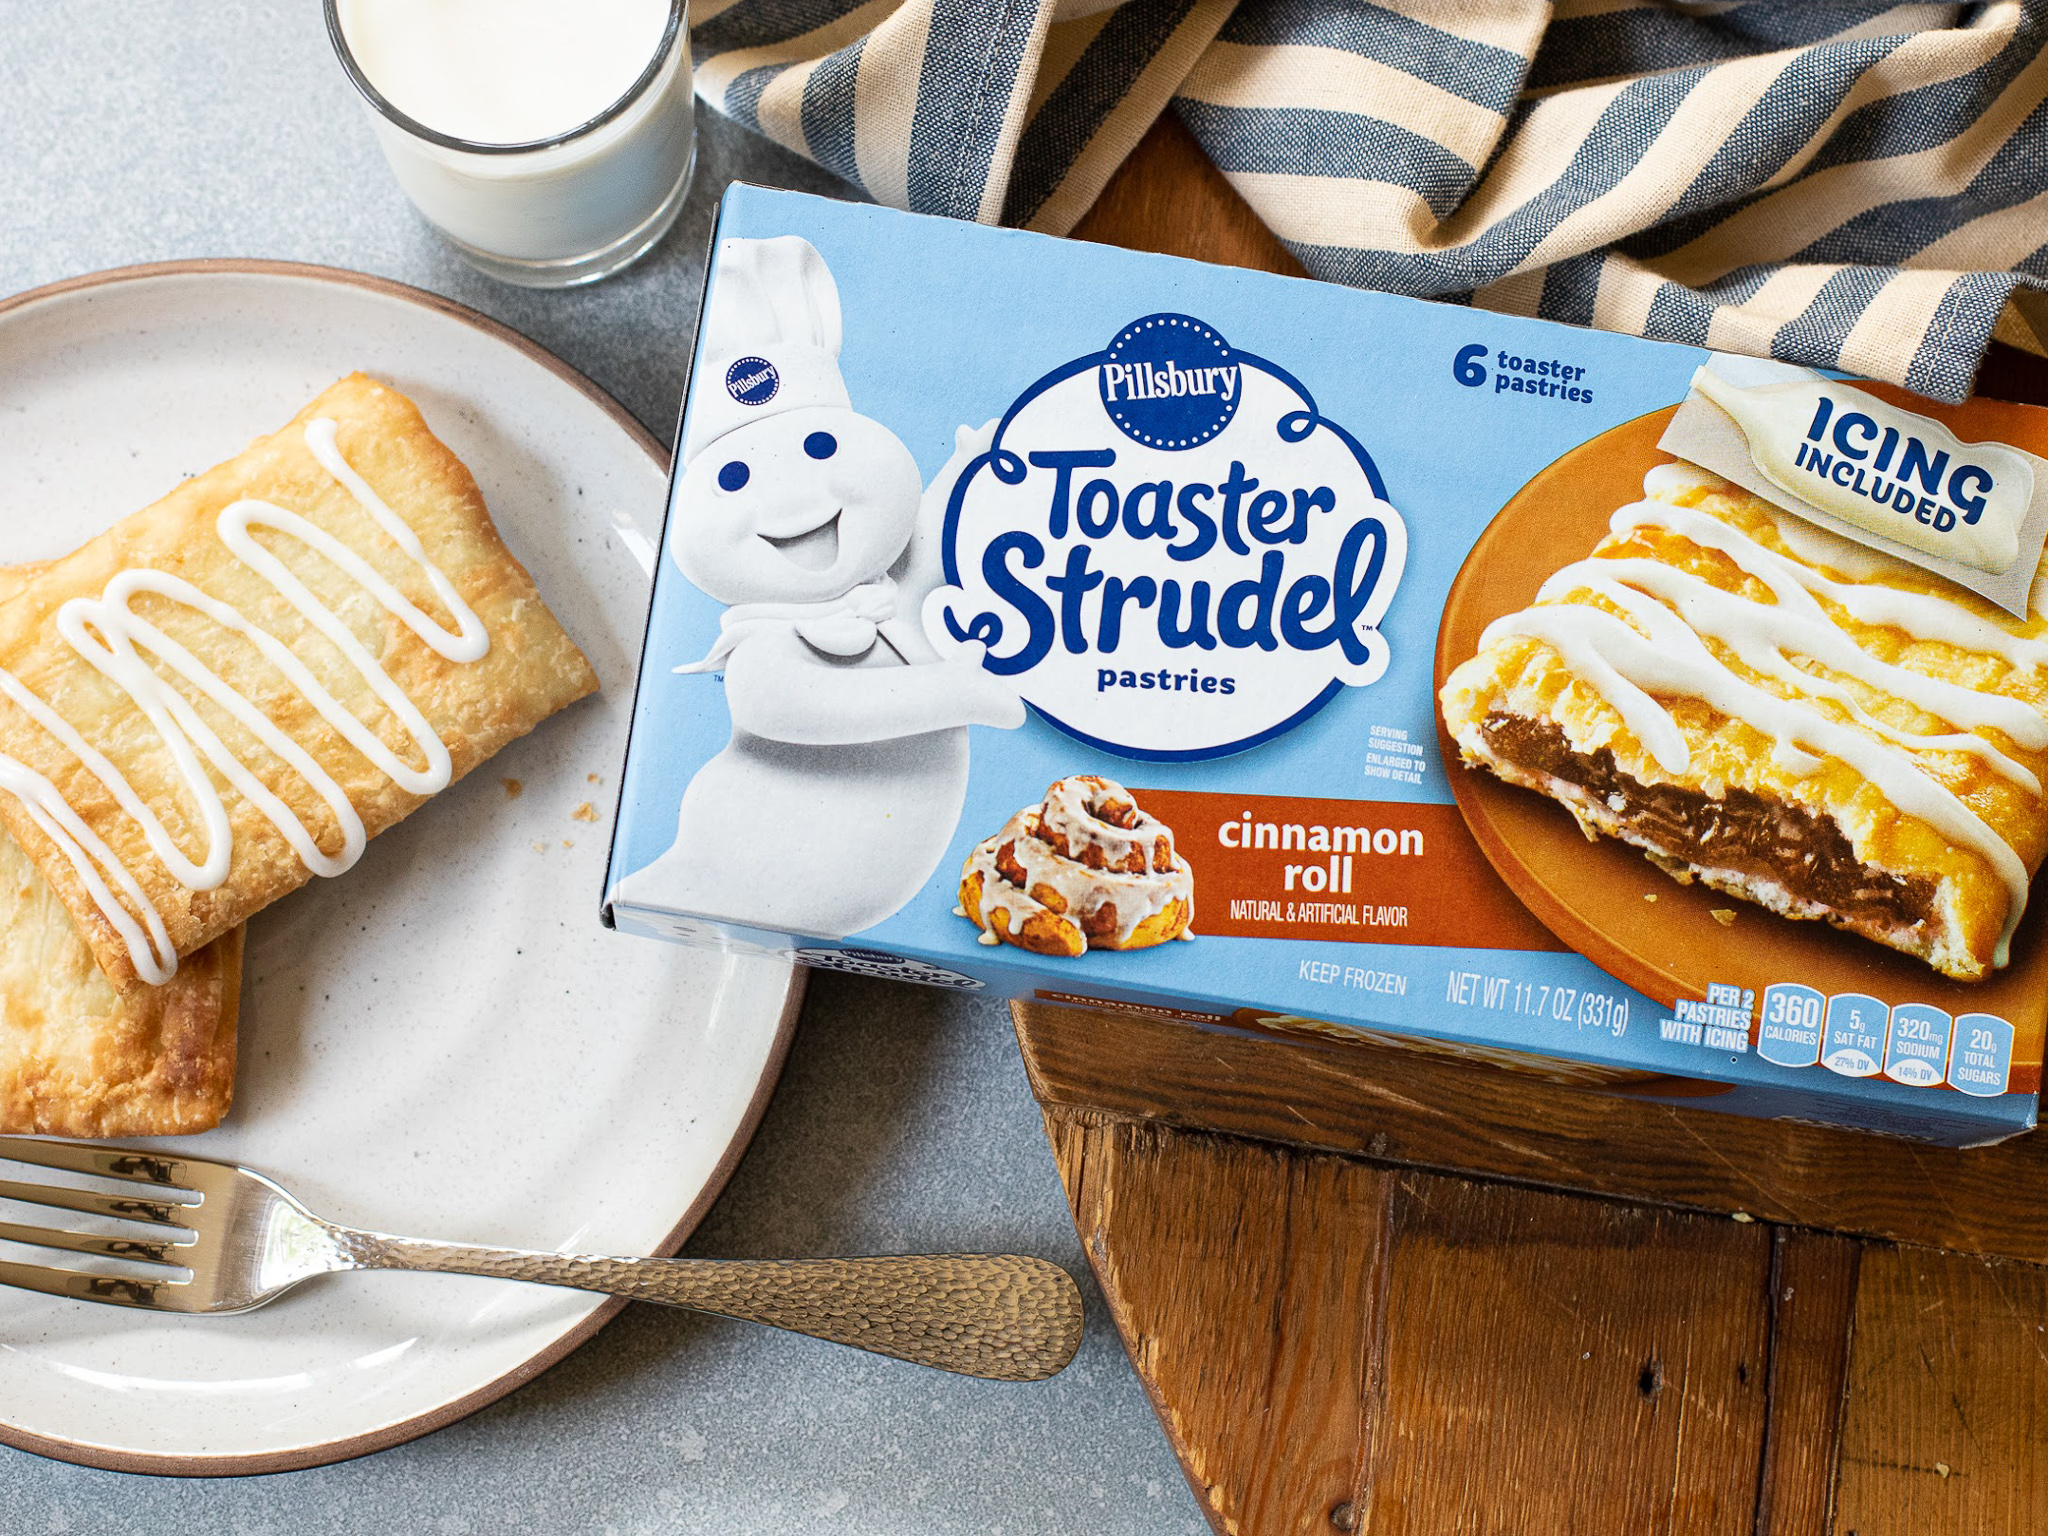 Pillsbury Toaster Strudel Pastries As Low As $2 Per Box At Publix